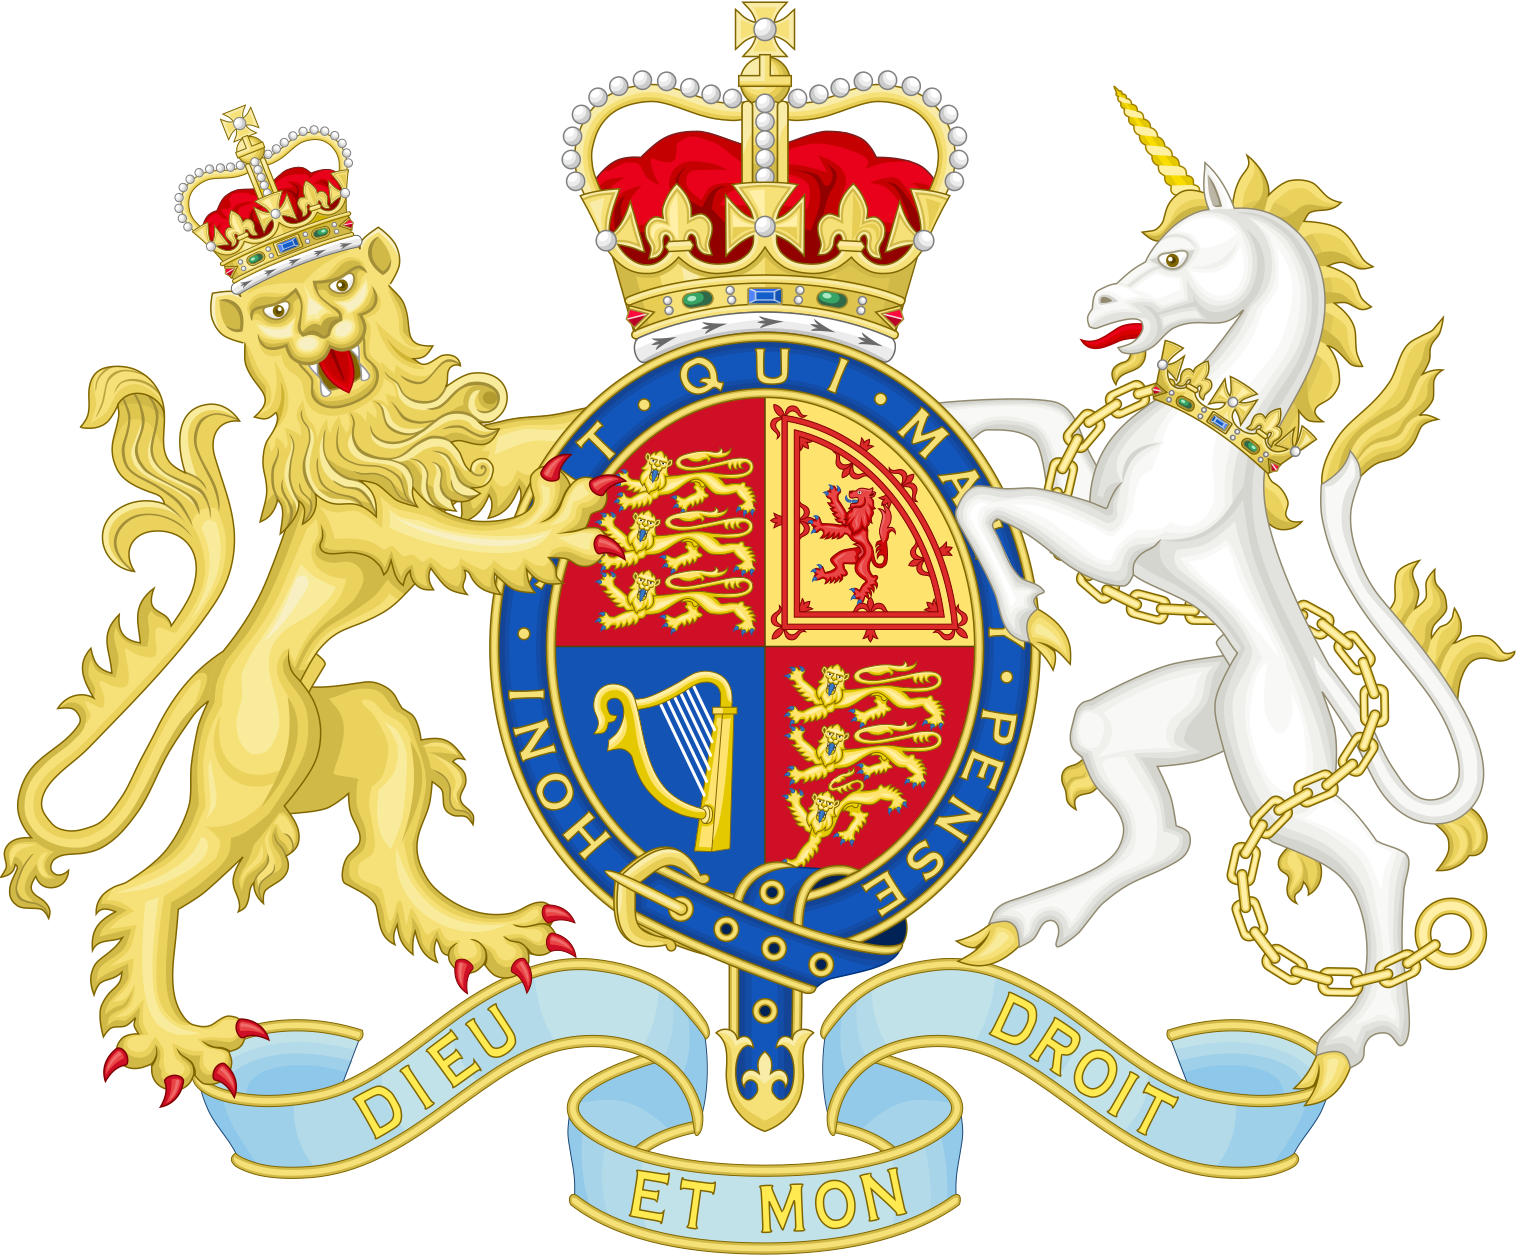 1530px-royal_coat_of_arms_of_the_united_kingdom_hm_government_.svg.png